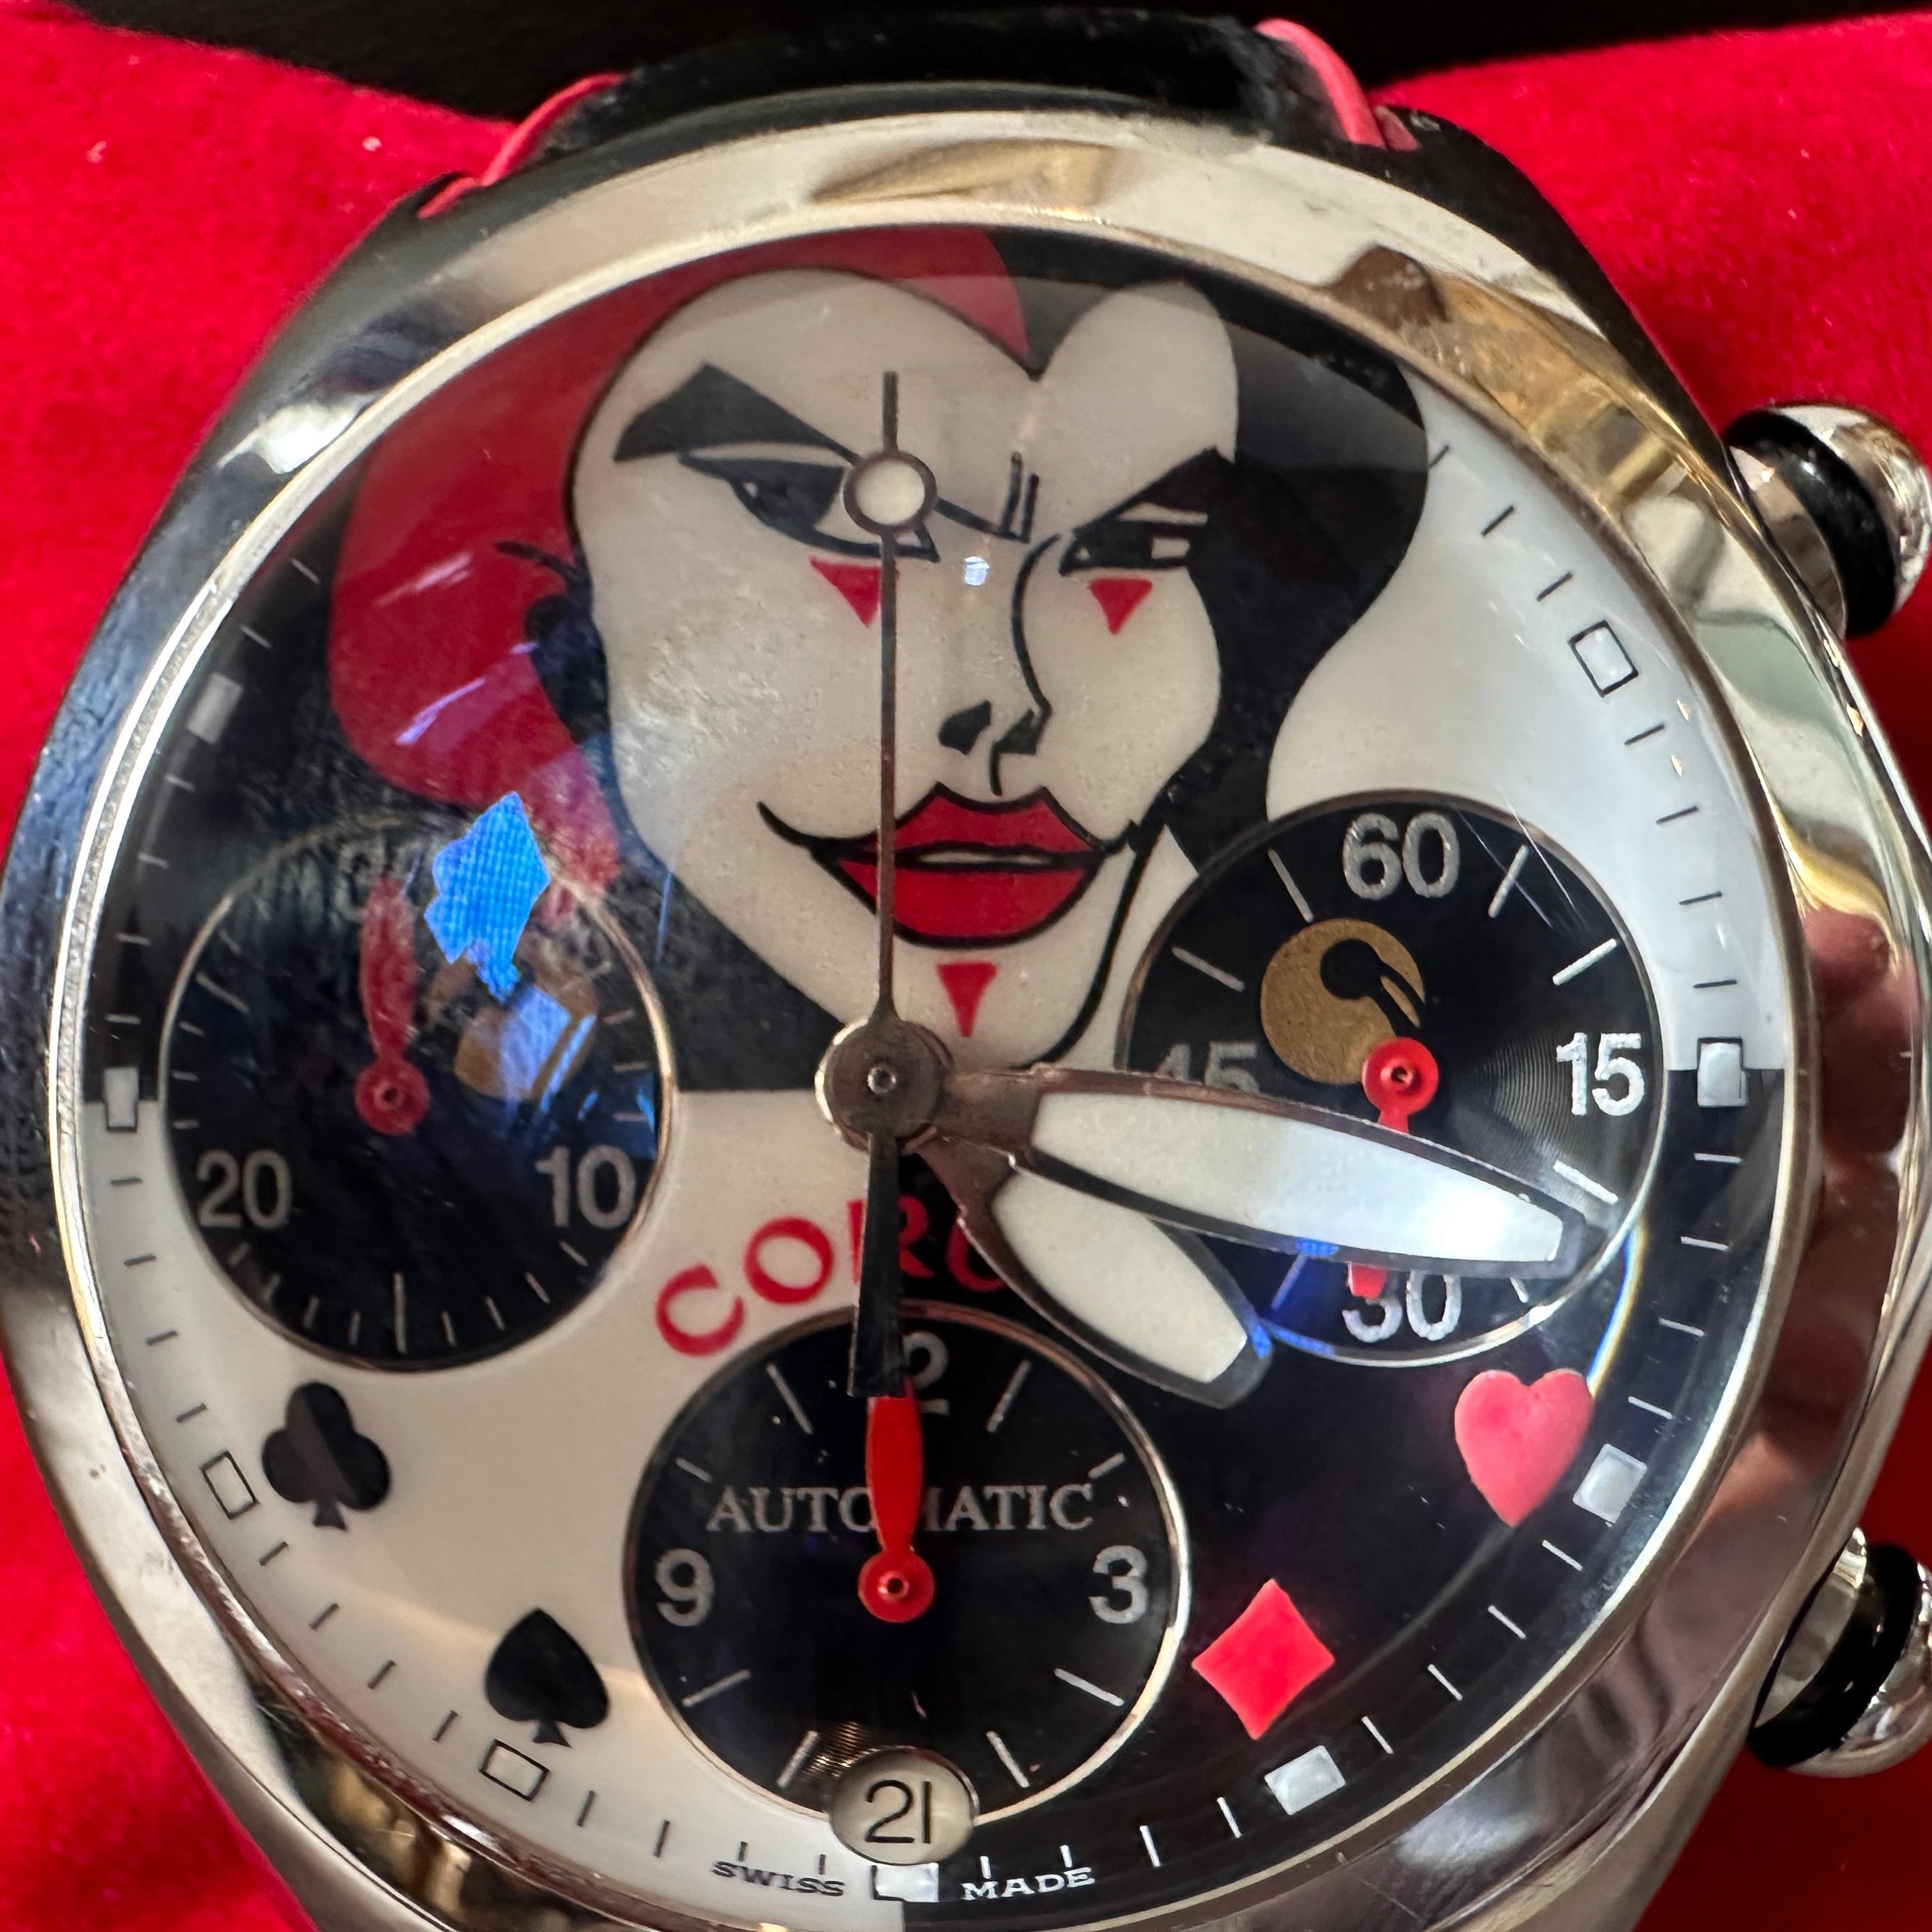 This Corum Bubble Watch Joker Limited Edition, numbered 357/777, is a distinctive and sought-after timepiece known for its unique design and limited availability. This one it's in perfect conditions with documents and box, only a little sign on the